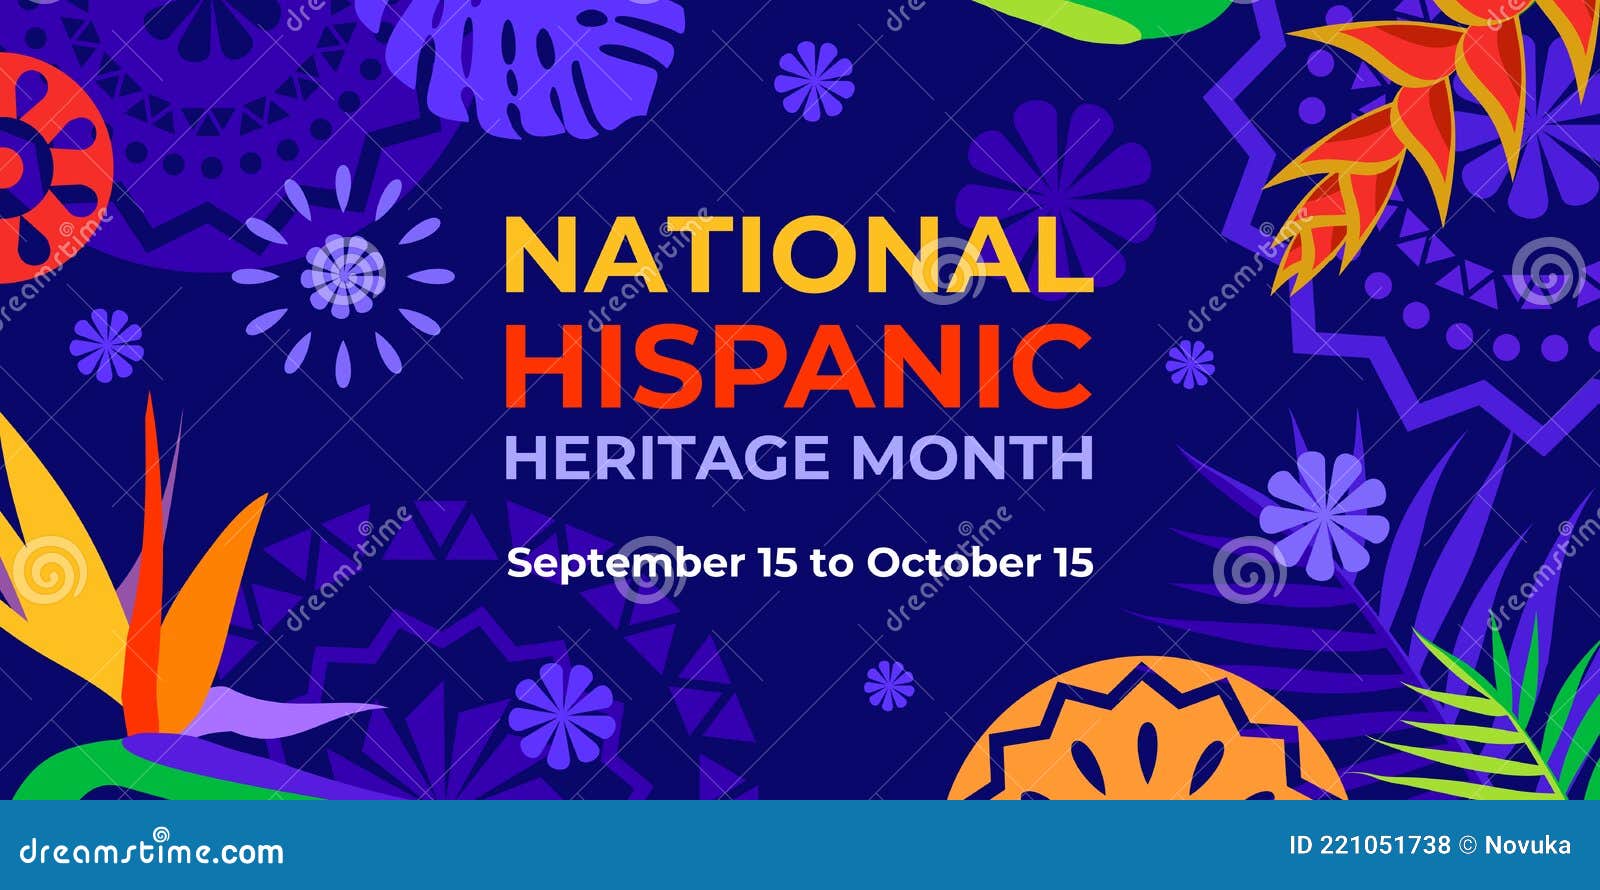 hispanic heritage month.  web banner, poster, card for social media, networks. greeting with national hispanic heritage